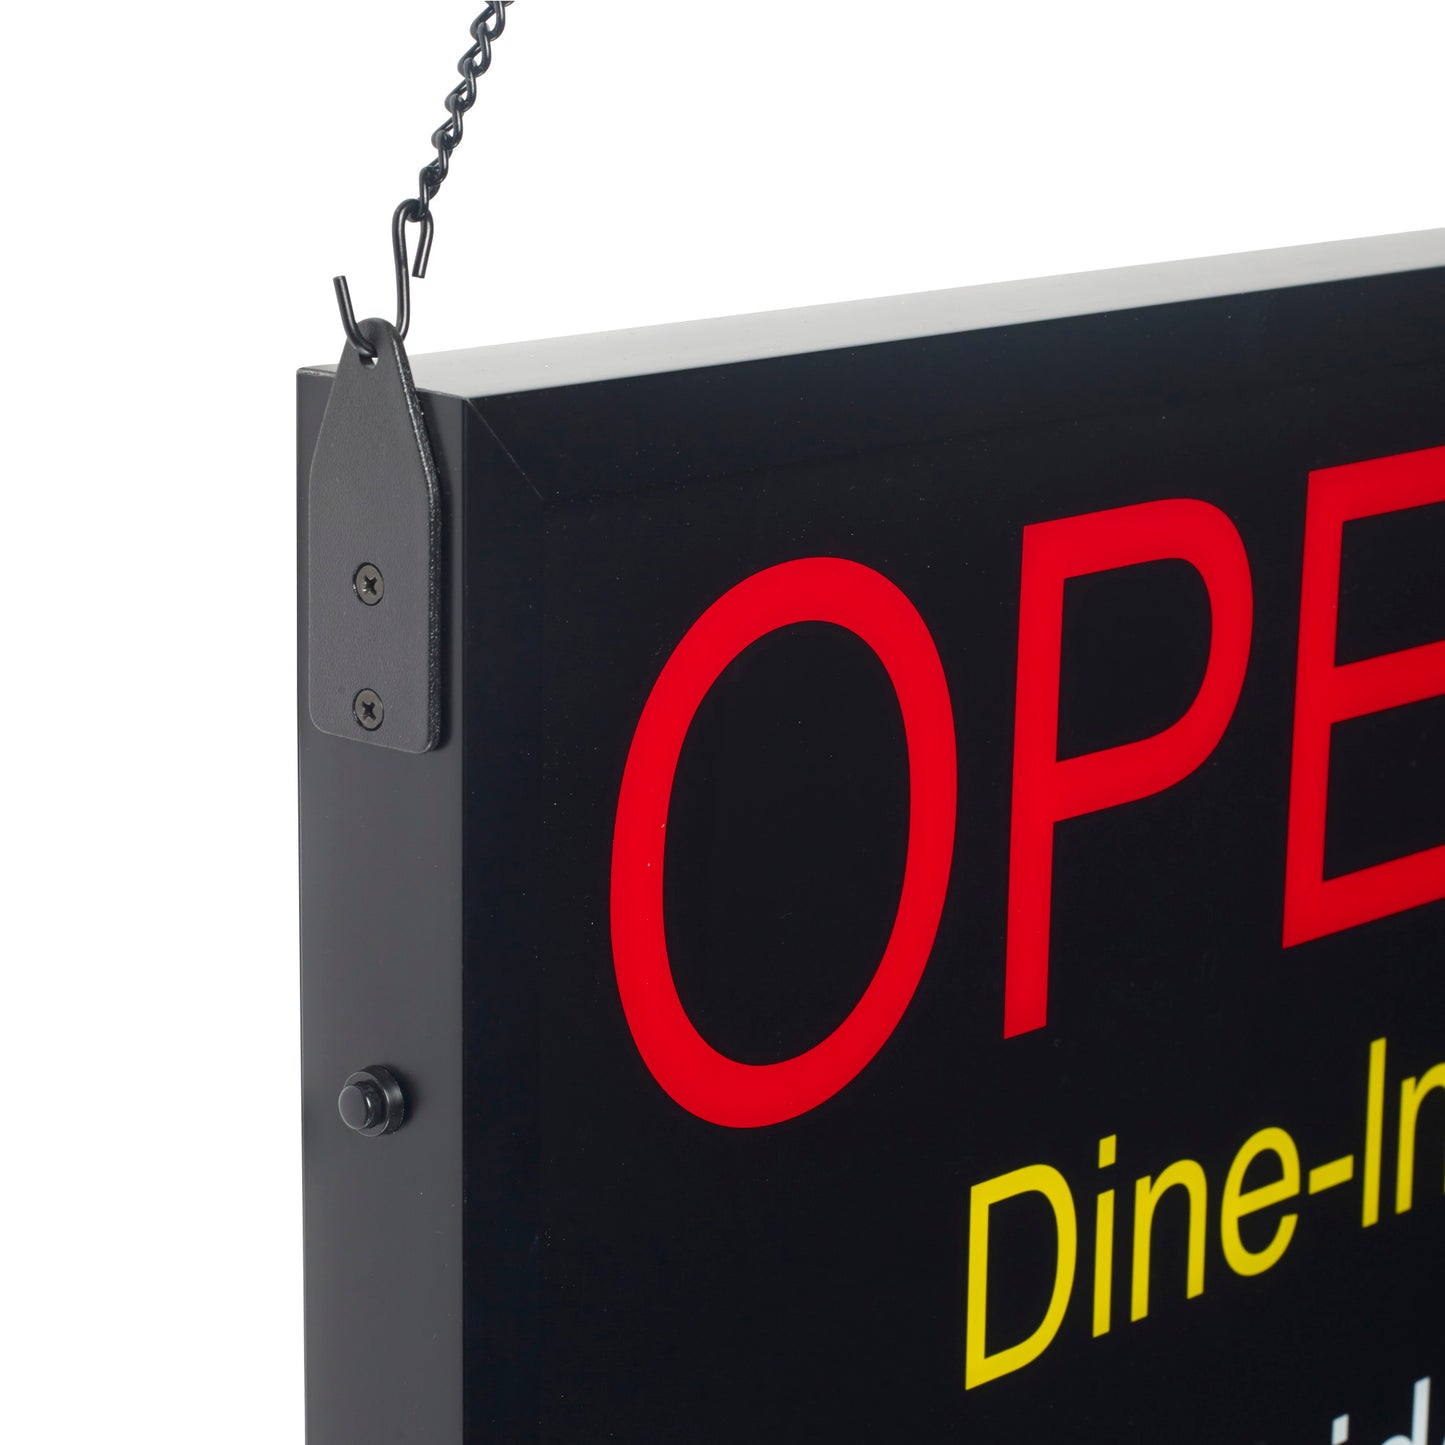 LED-20 - All-in-One "OPEN" LED Sign